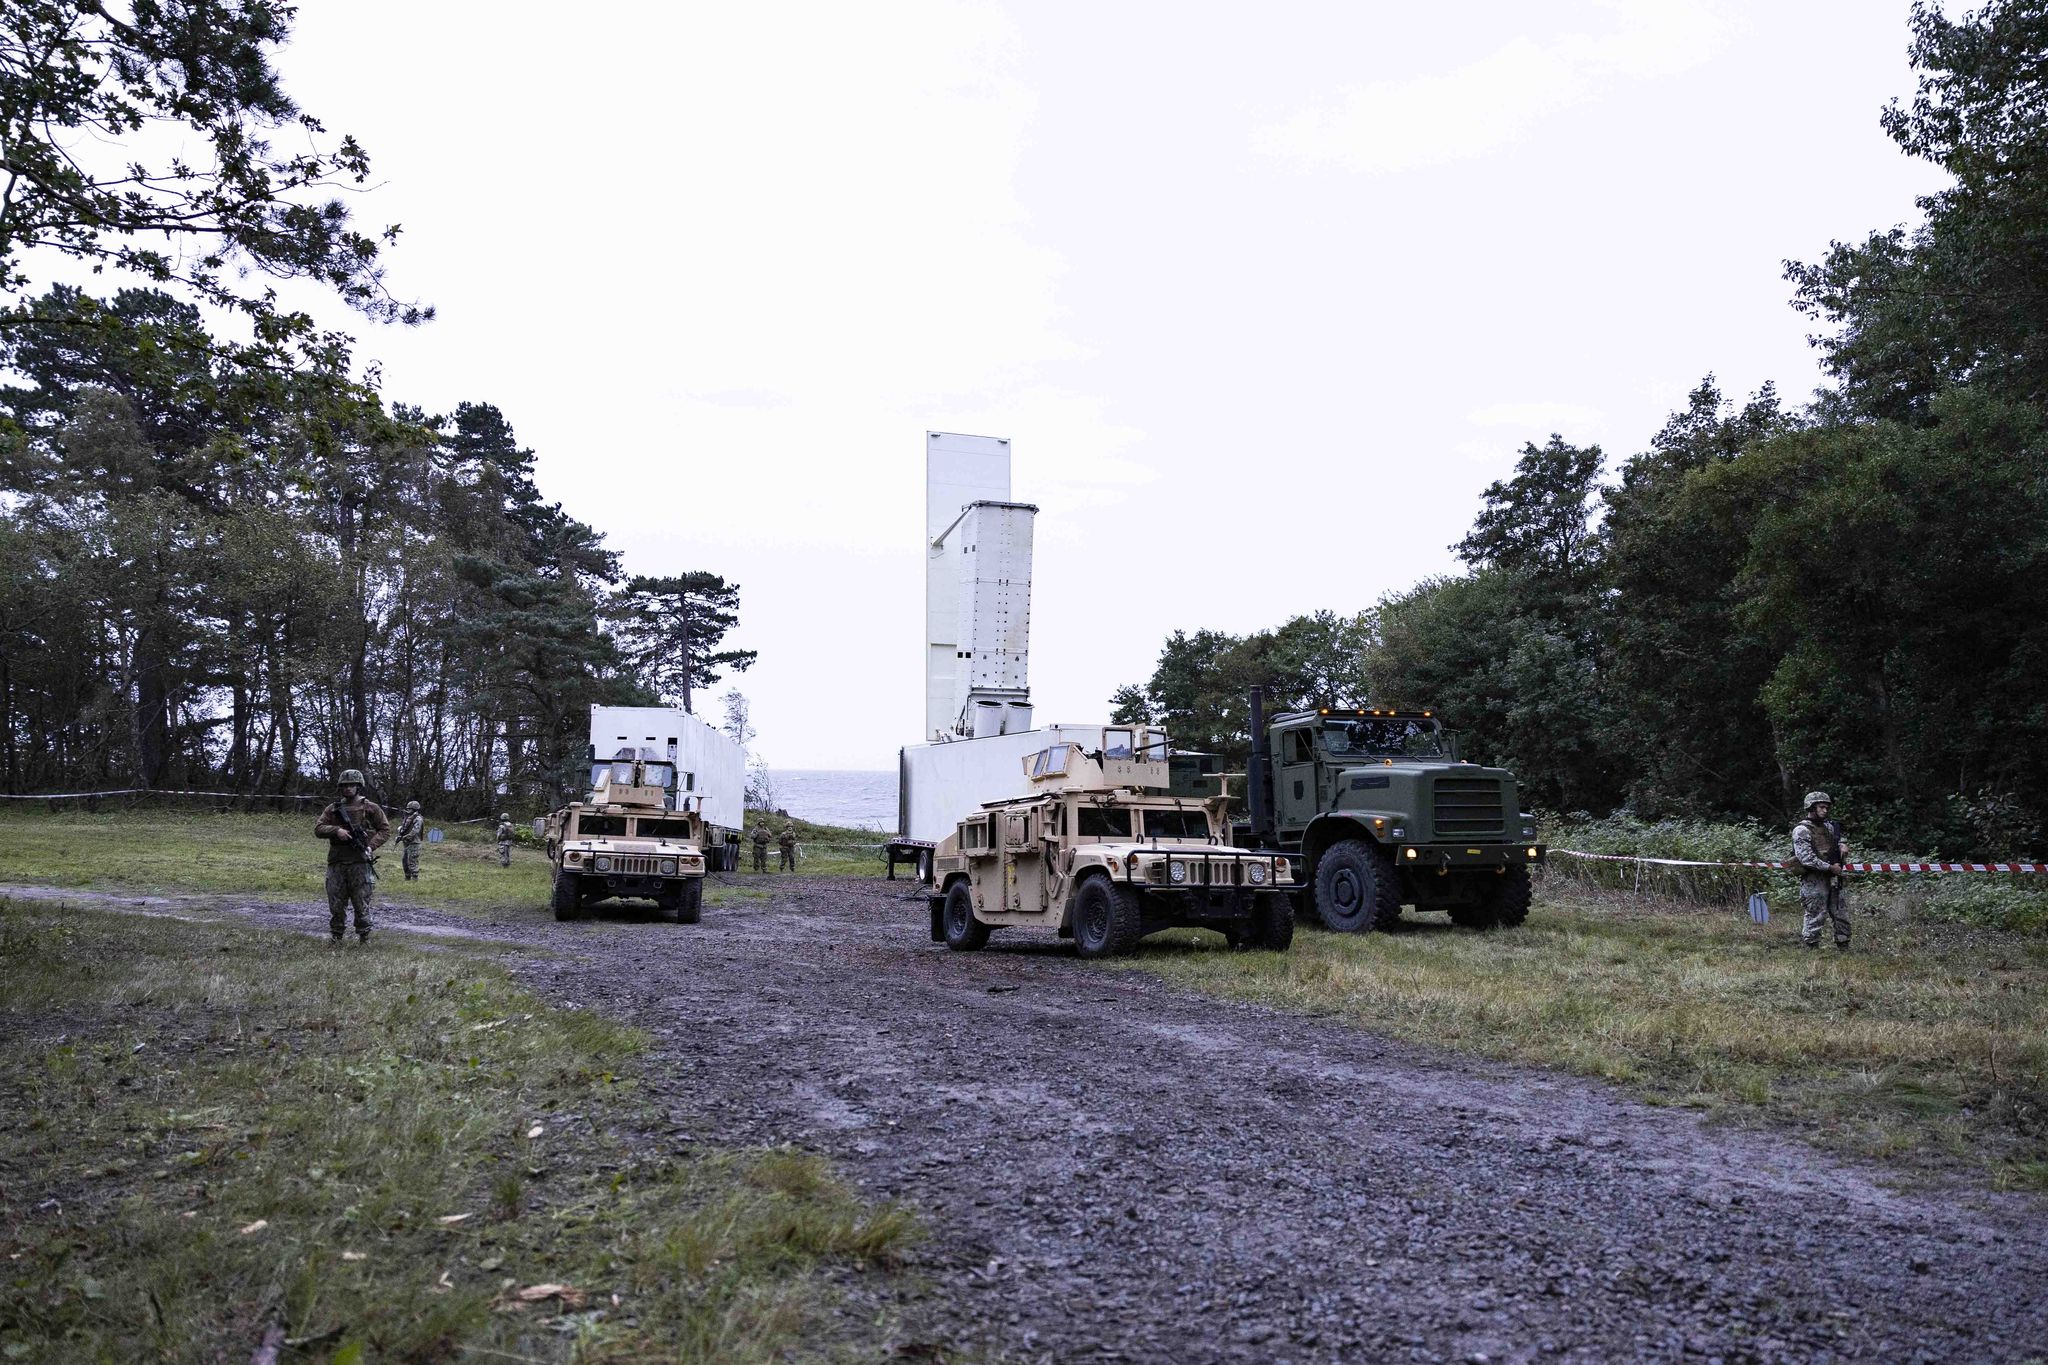 230920 n pi330 1179 ronne, denmark september 20, 2023 seabees, assigned to naval mobile construction battalion 133 nmcb 133, test two containerized sm 6 missile launchers in ronne, denmark, september 20, 2023 us naval forces europe africaus 6th fleet conducts the full spectrum of joint and naval operations, often in concert with allied and interagency partners, in order to advance us national interests and security and stability in europe and africa us navy photo by mass communication specialist 2nd class andrew waters